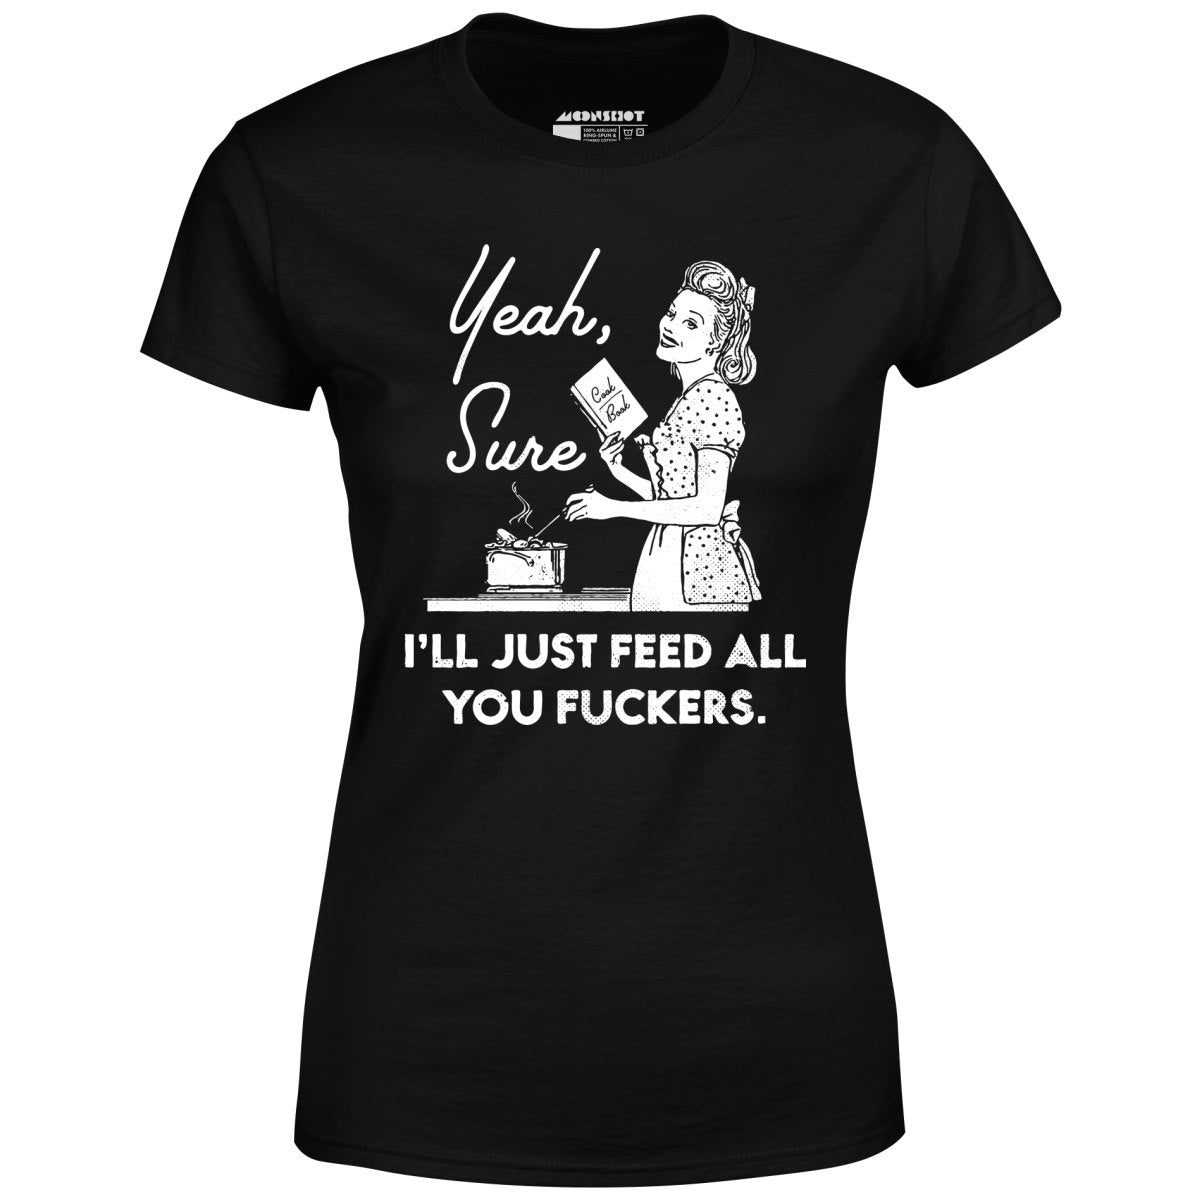 Yeah, Sure I'll Just Feed All You Fuckers - Women's T-Shirt